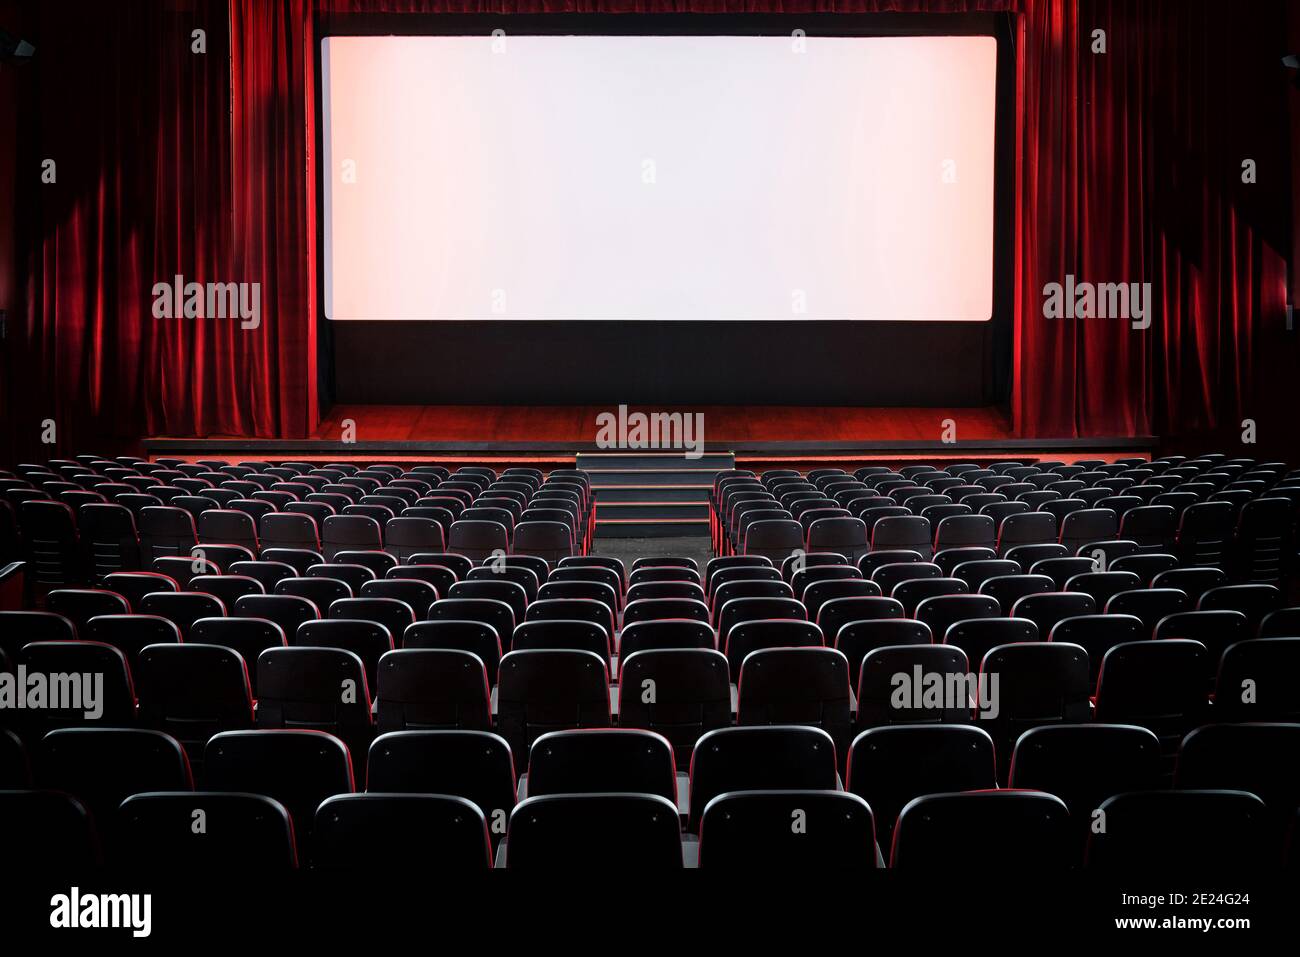 Auditorium of an empty movie theatre and stage with opened red velvet curtains viewed from the rear of the rows seats with lights on the screen Stock Photo